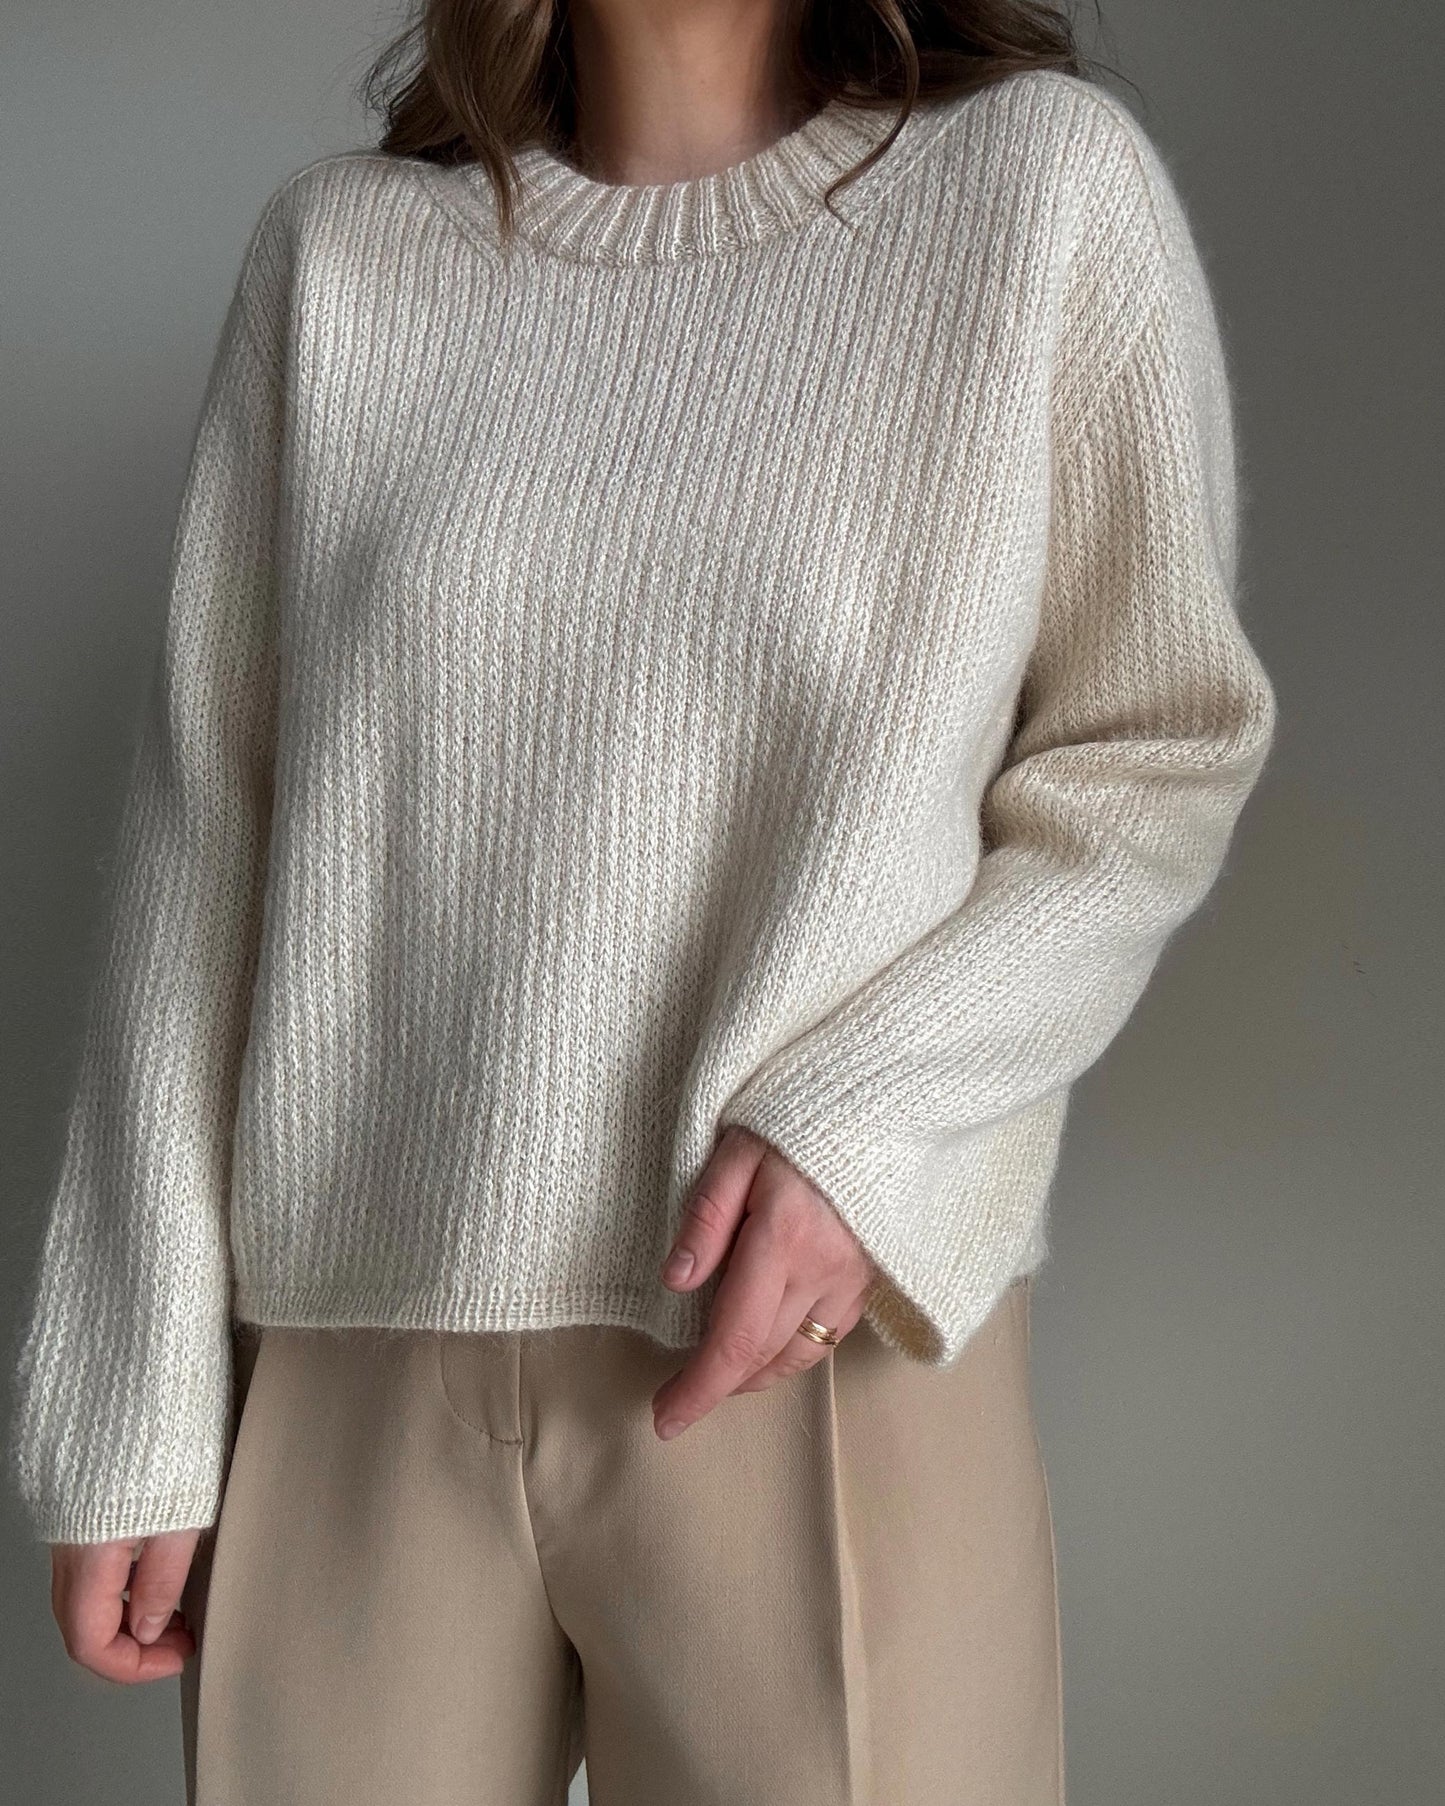 Knitted Chantal Sweater pattern, a blend of classic elegance and modern style, perfect for ladies.